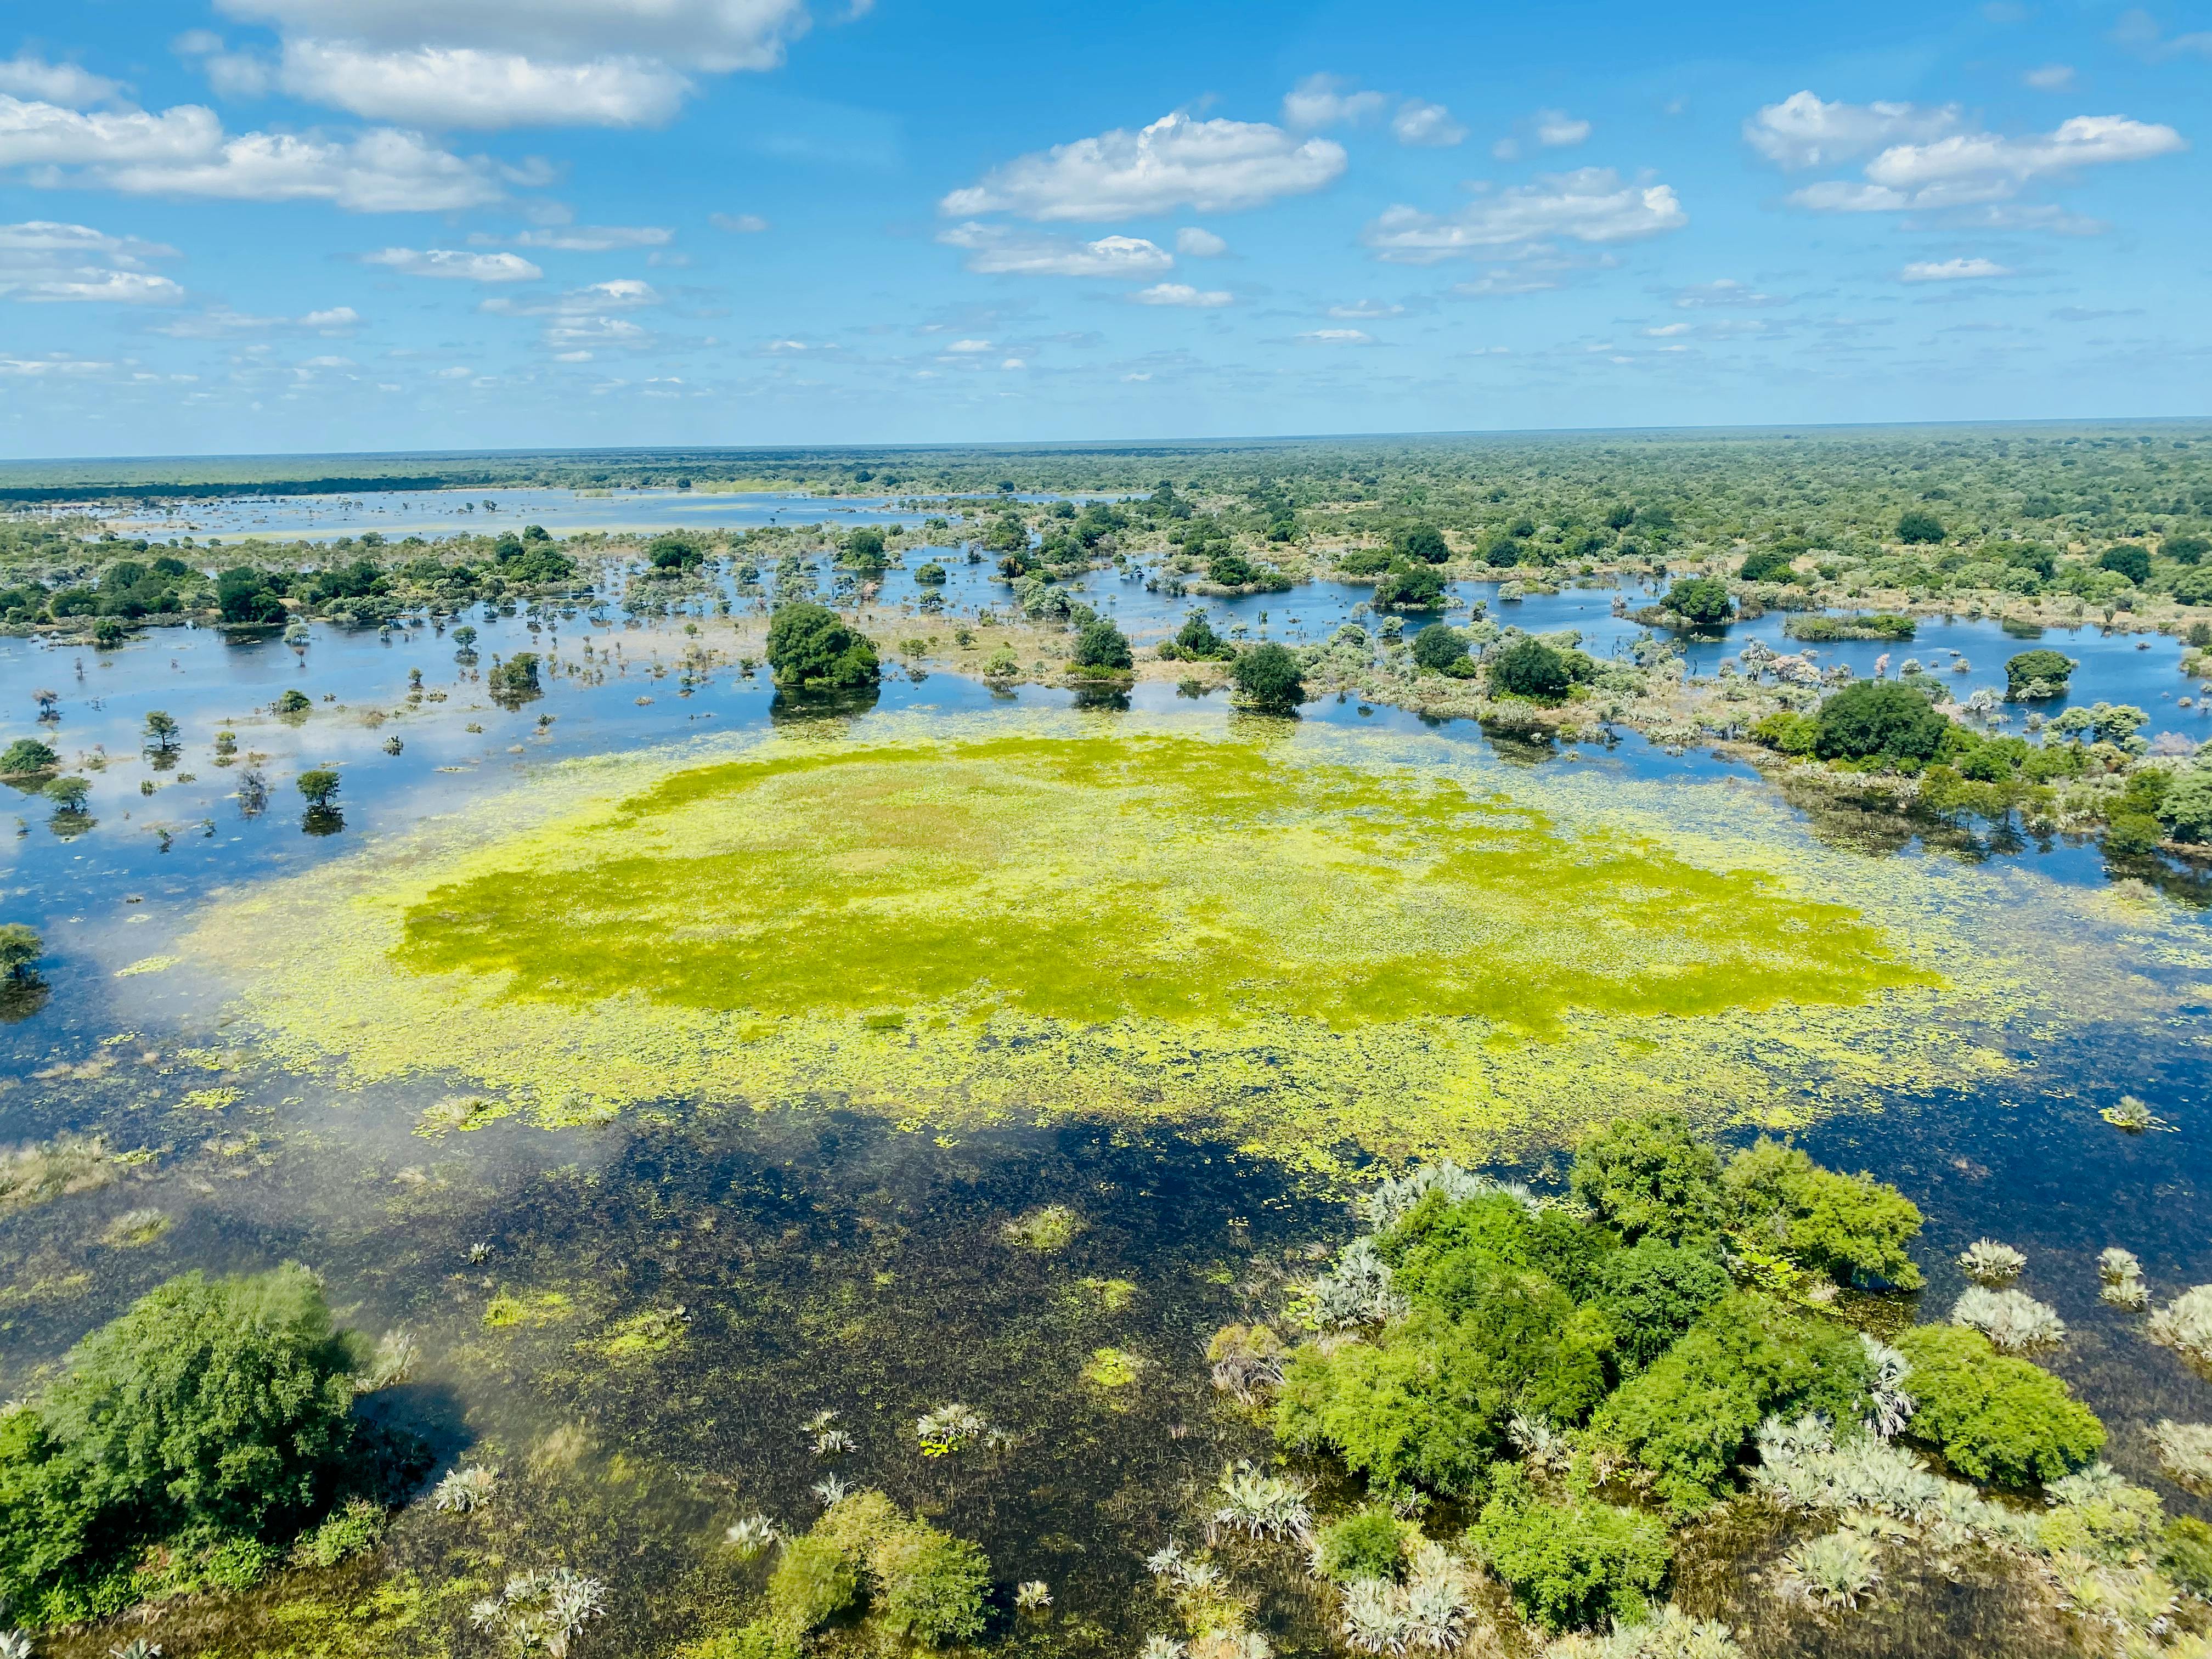 The Shrinking Conservation Potential of Beautiful, Troubled Mozambique 